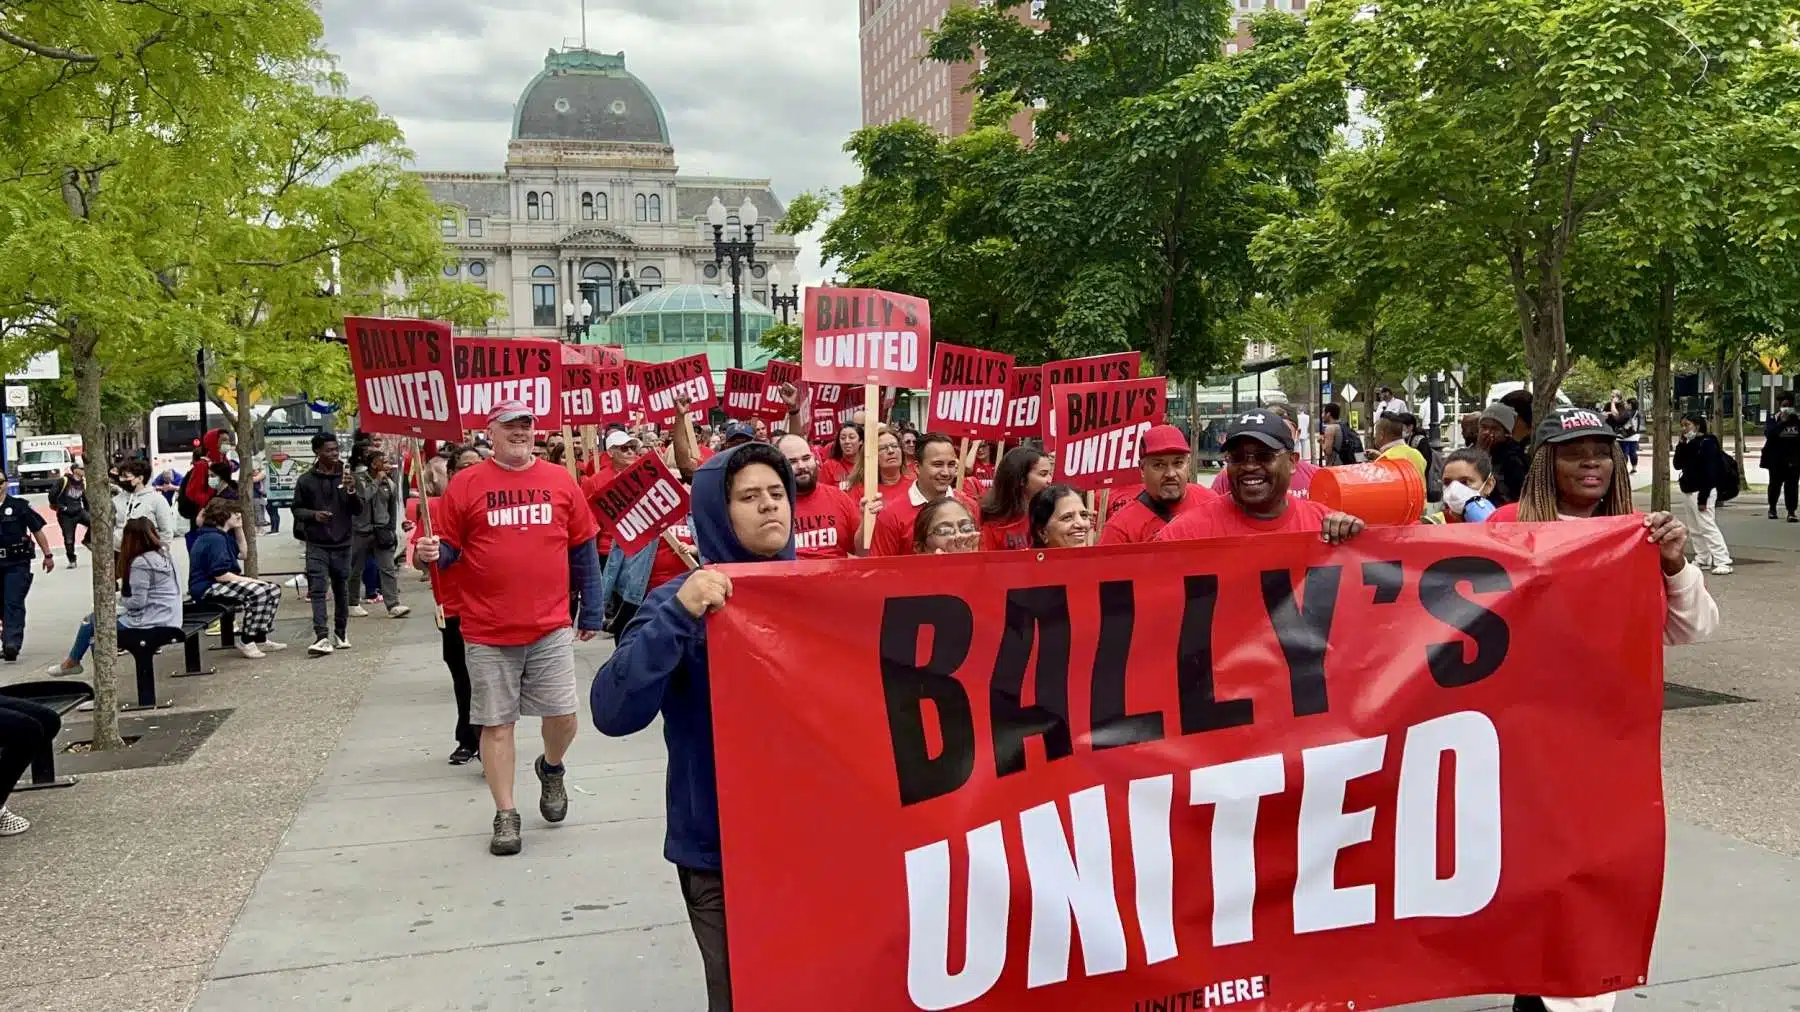 Casino workers rally and march to Bally’s HQ in Providence to demand full staffing and substantial raises